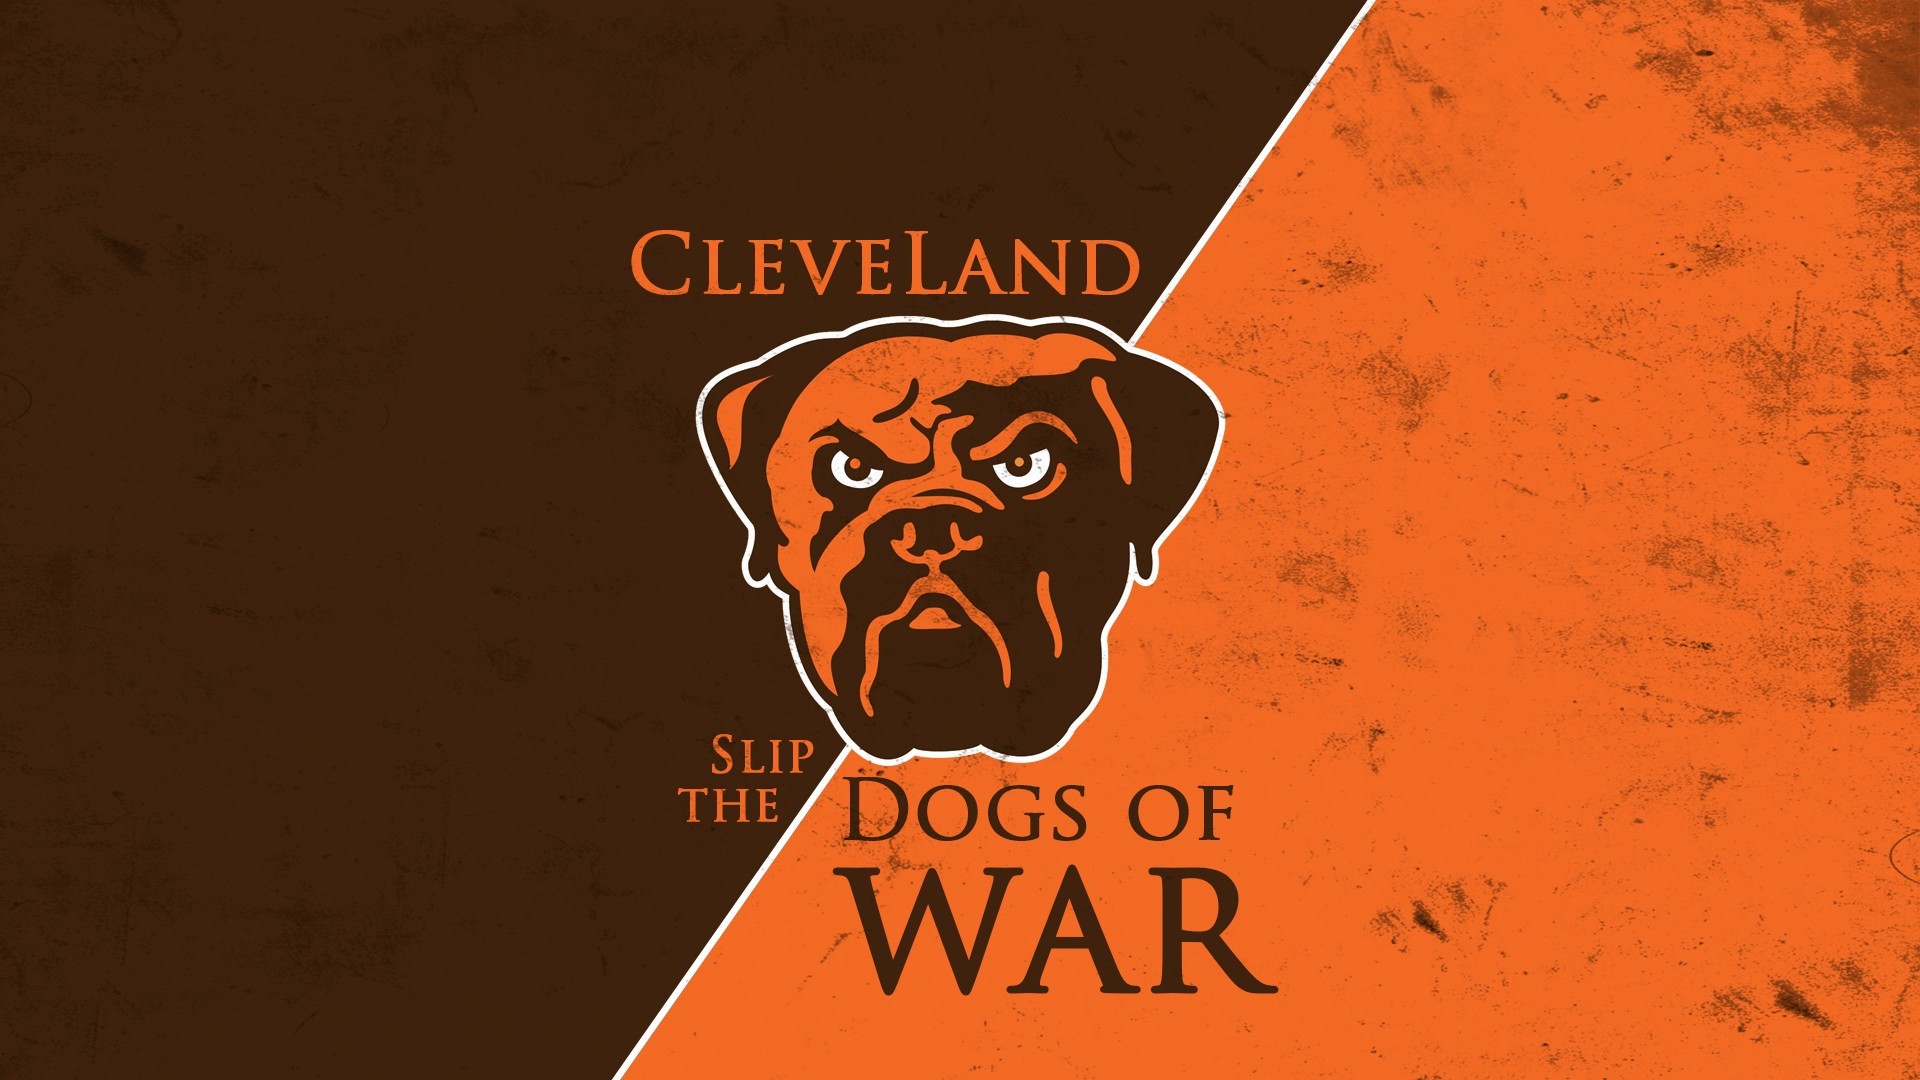 1920x1080 ... cleveland browns wallpaper best images collections hd for gadget ...